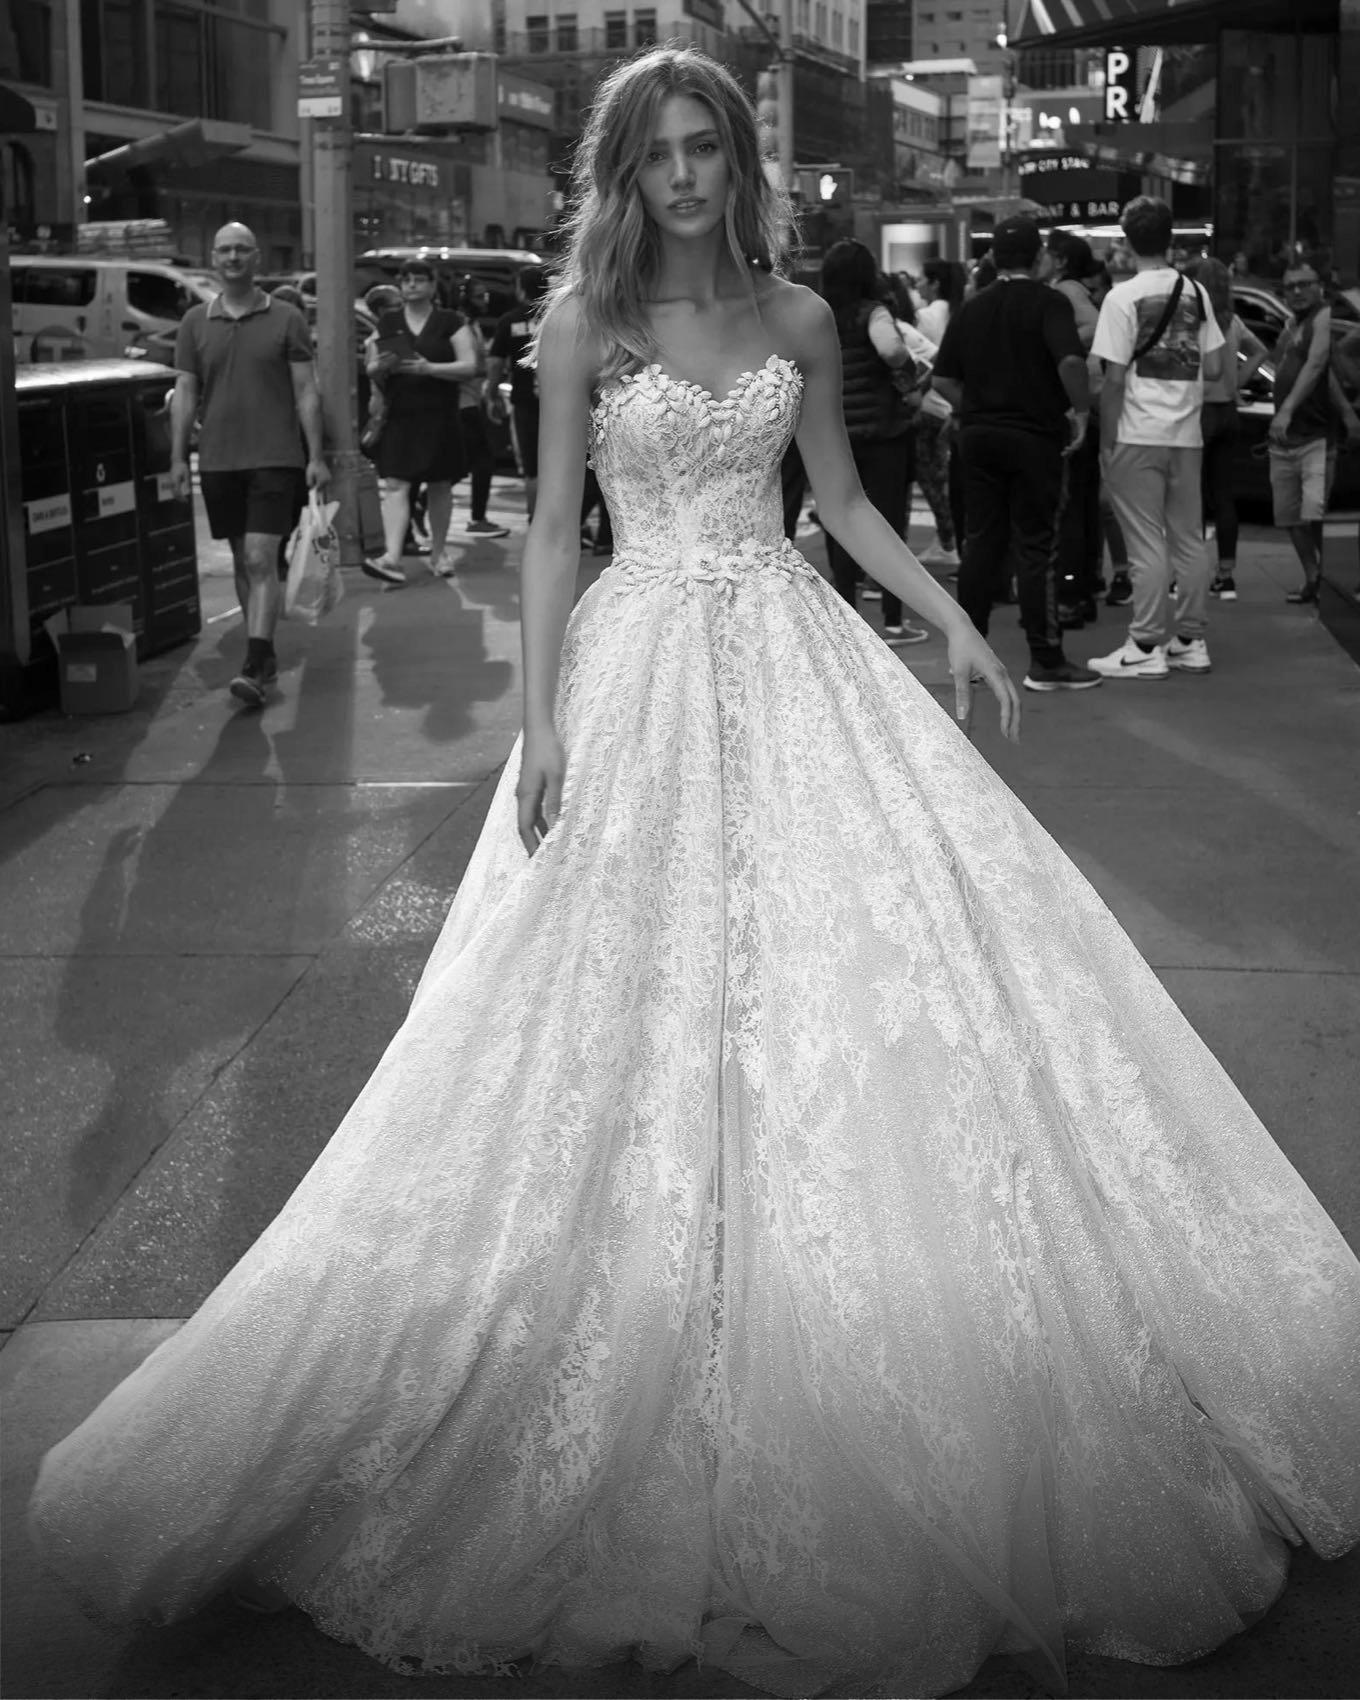 Model wearing a white gown by Ballgown. Orlando bridal shop